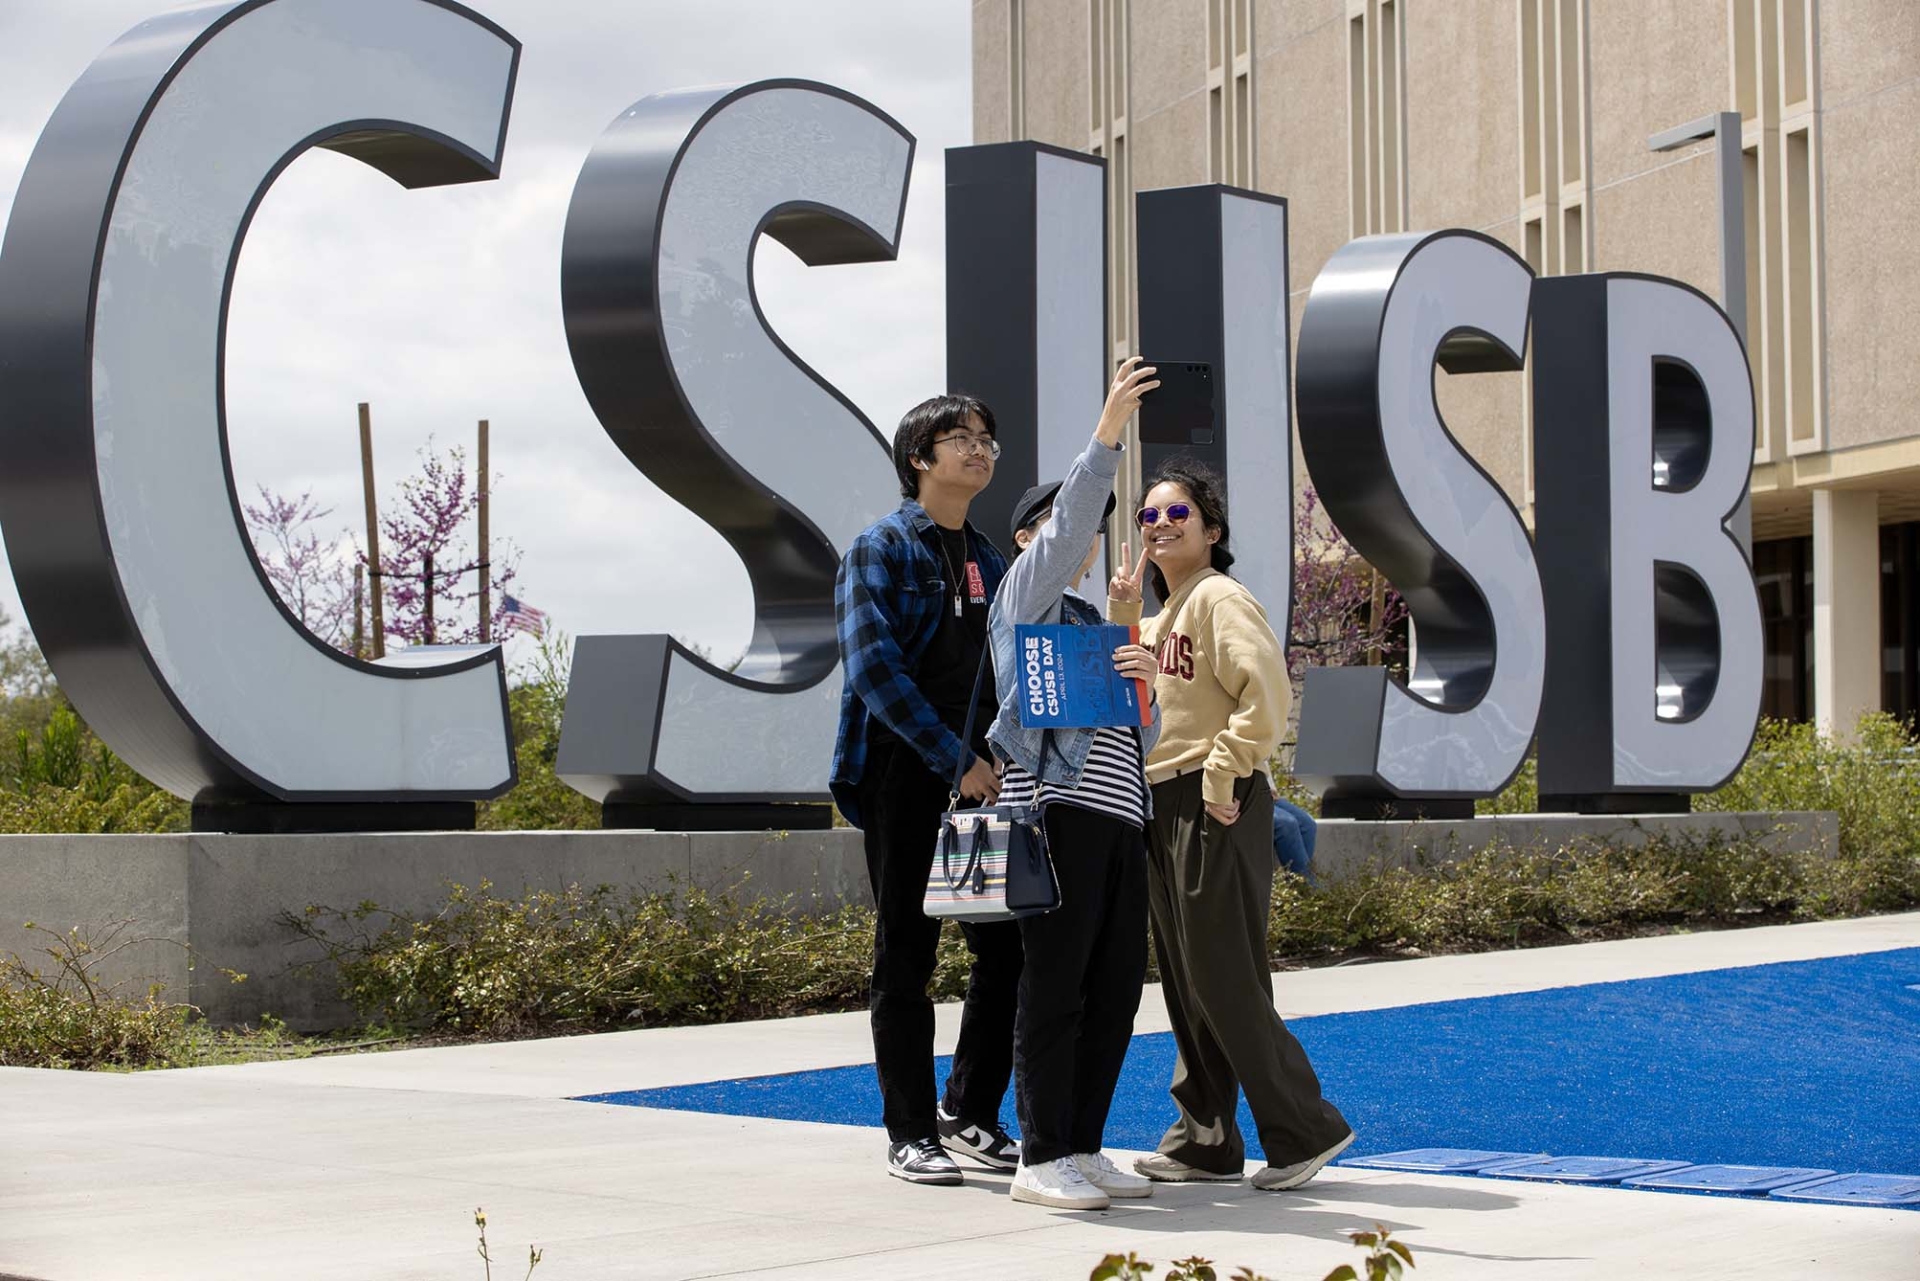 A group takes a selfie at the sprit letters during Choose CSUSB Day.